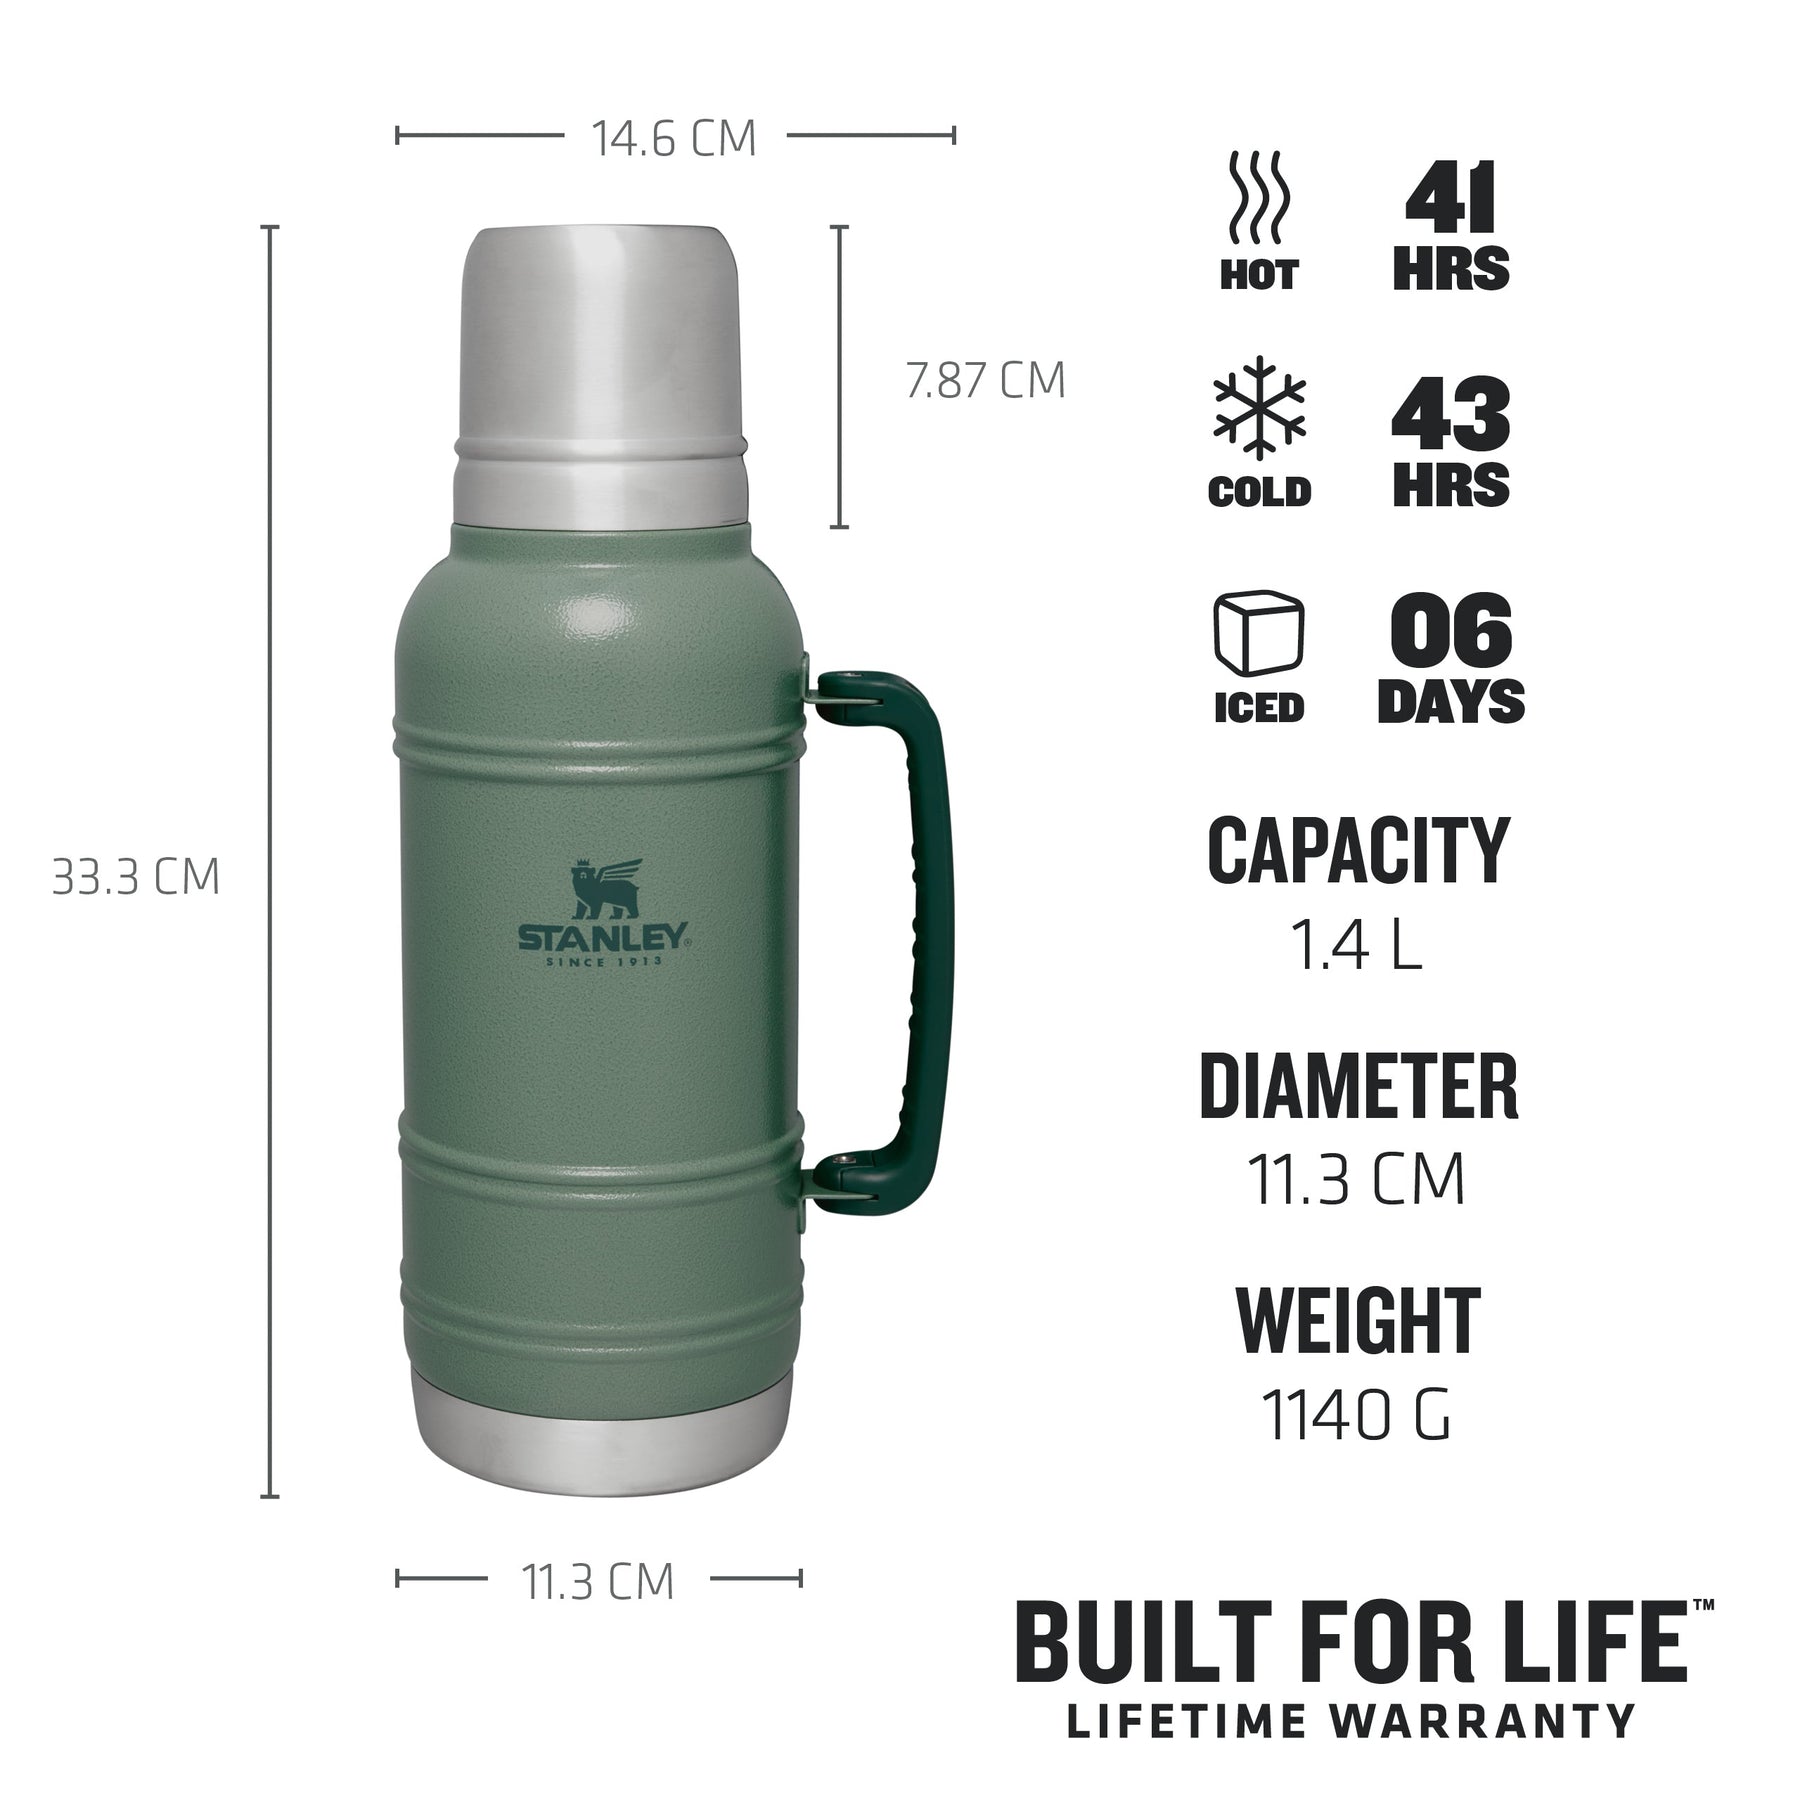 https://cdn.shopify.com/s/files/1/0516/4564/5000/products/TheArtisanThermalBottle1.4L-1.5QT-HammertoneGreen-USPs_Thermals_1800x1800.jpg?v=1699055776